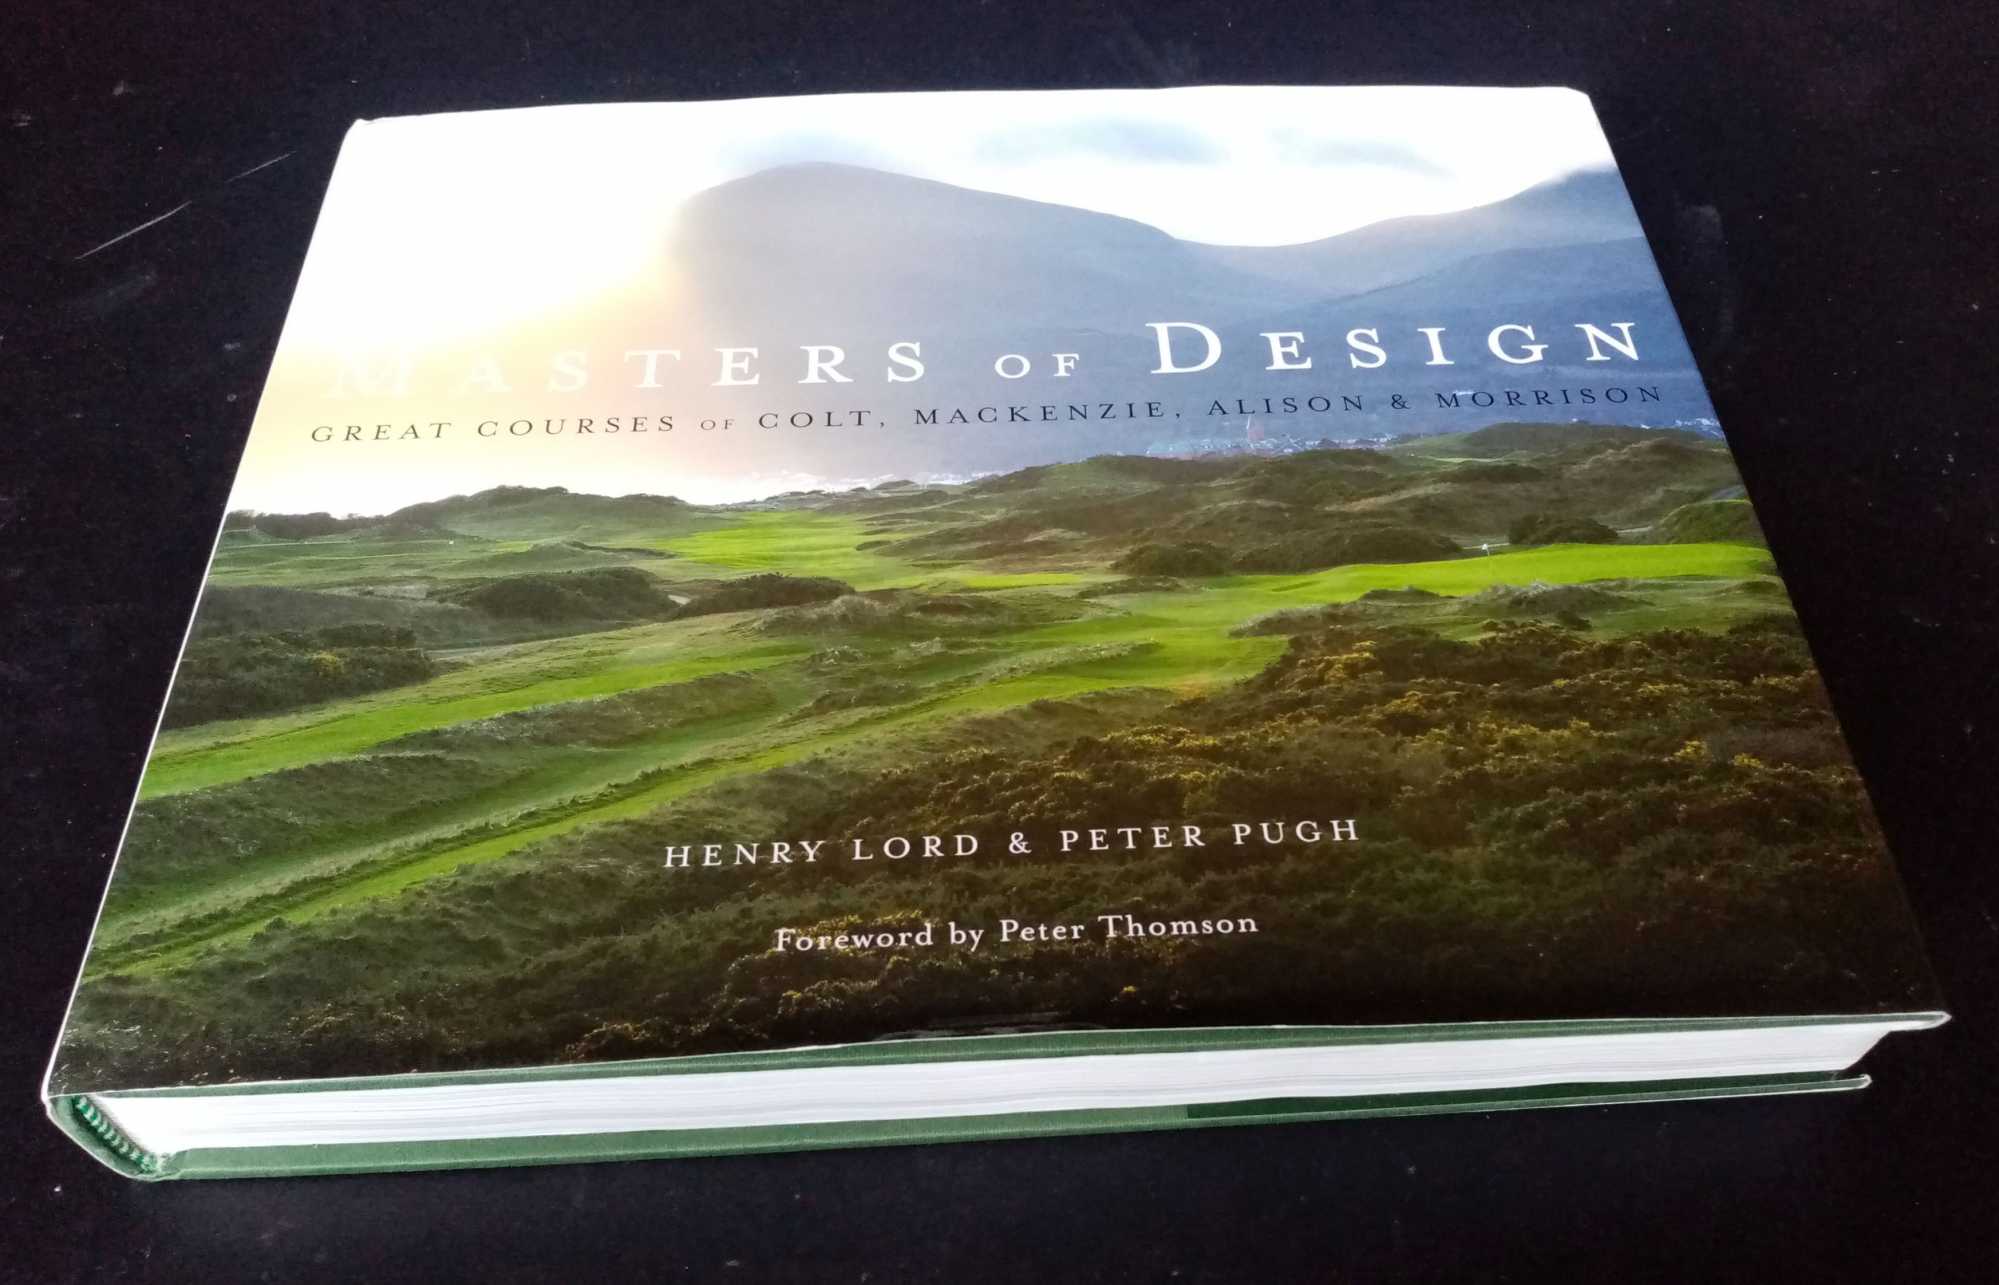 Henry Lord, Peter Pugh - Masters of Design: Great [Golf]Courses of Colt, Mackenzie, Alison and Morrison